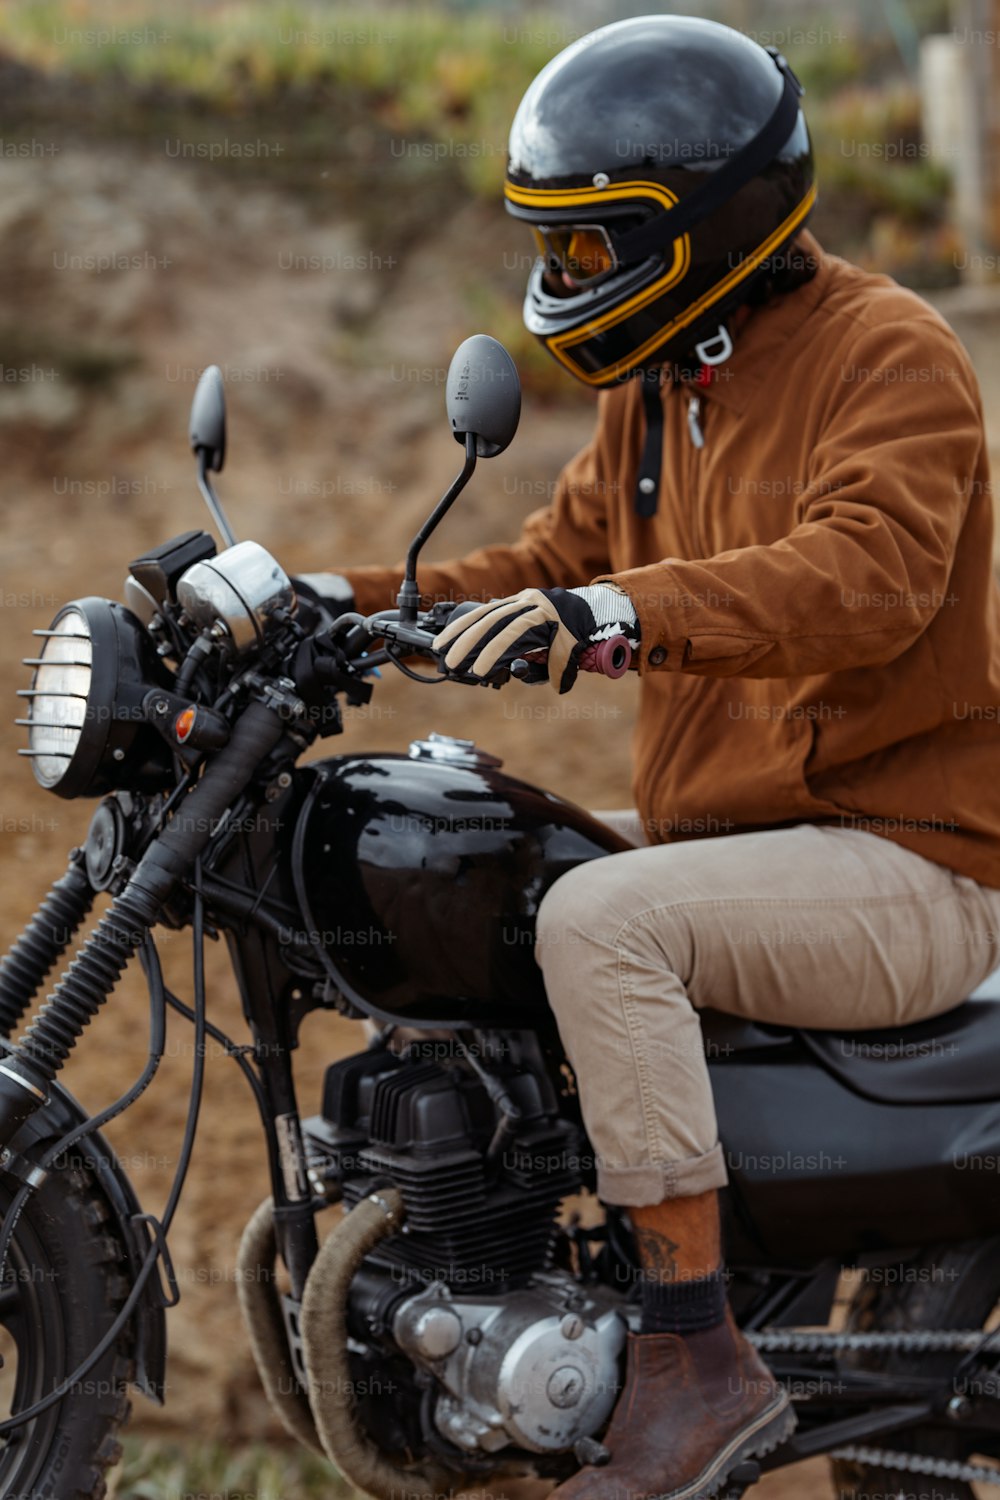 a man in a helmet is riding a motorcycle